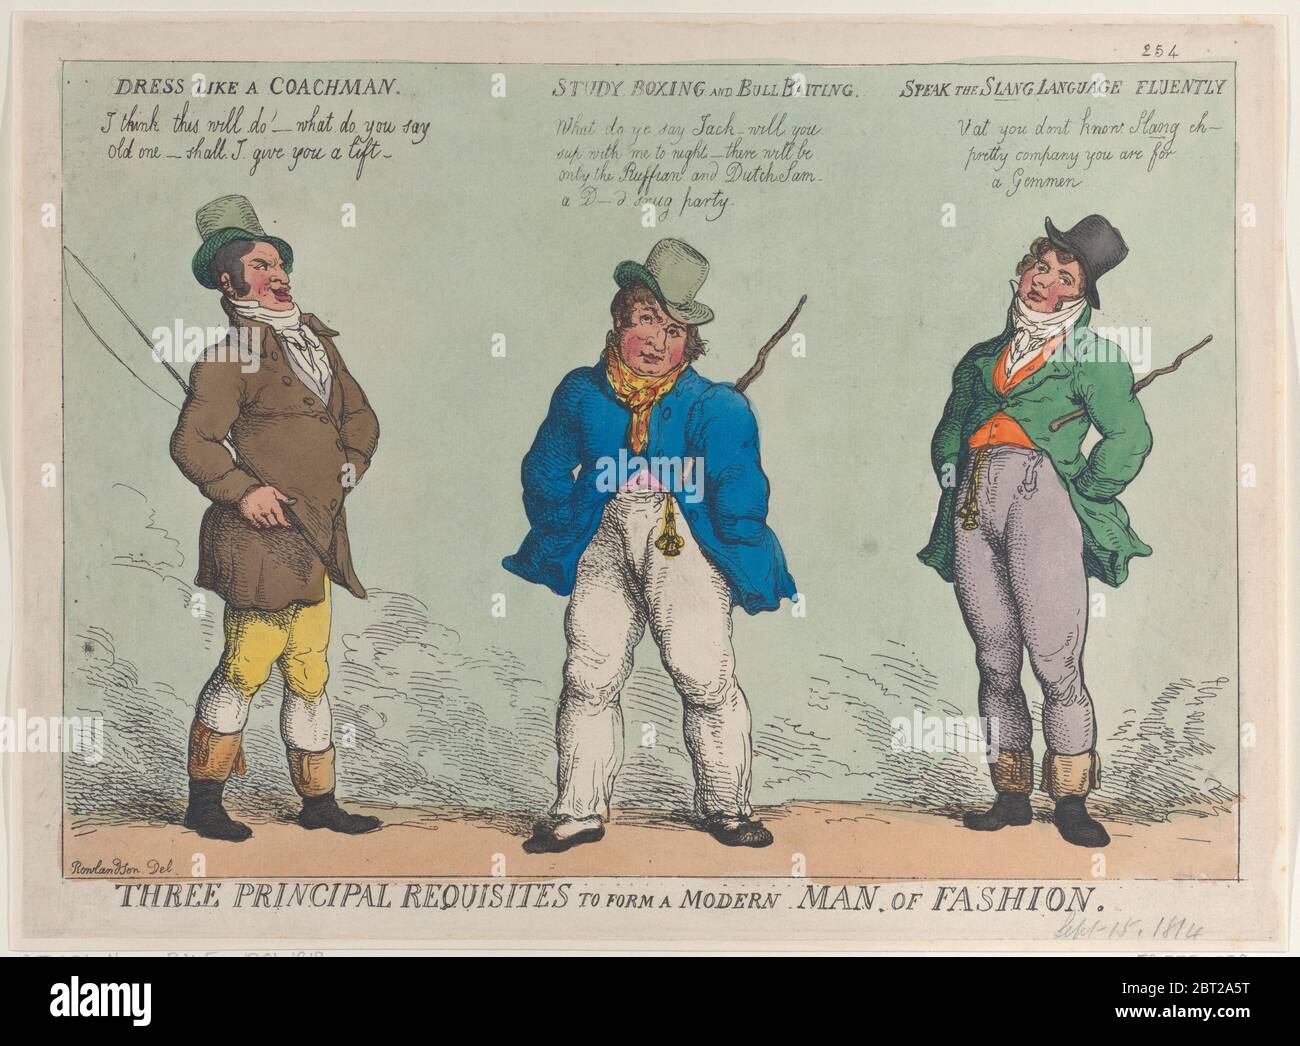 Three Principal Requisites to Form a Modern Man of Fashion, September 15, 1814. Stock Photo